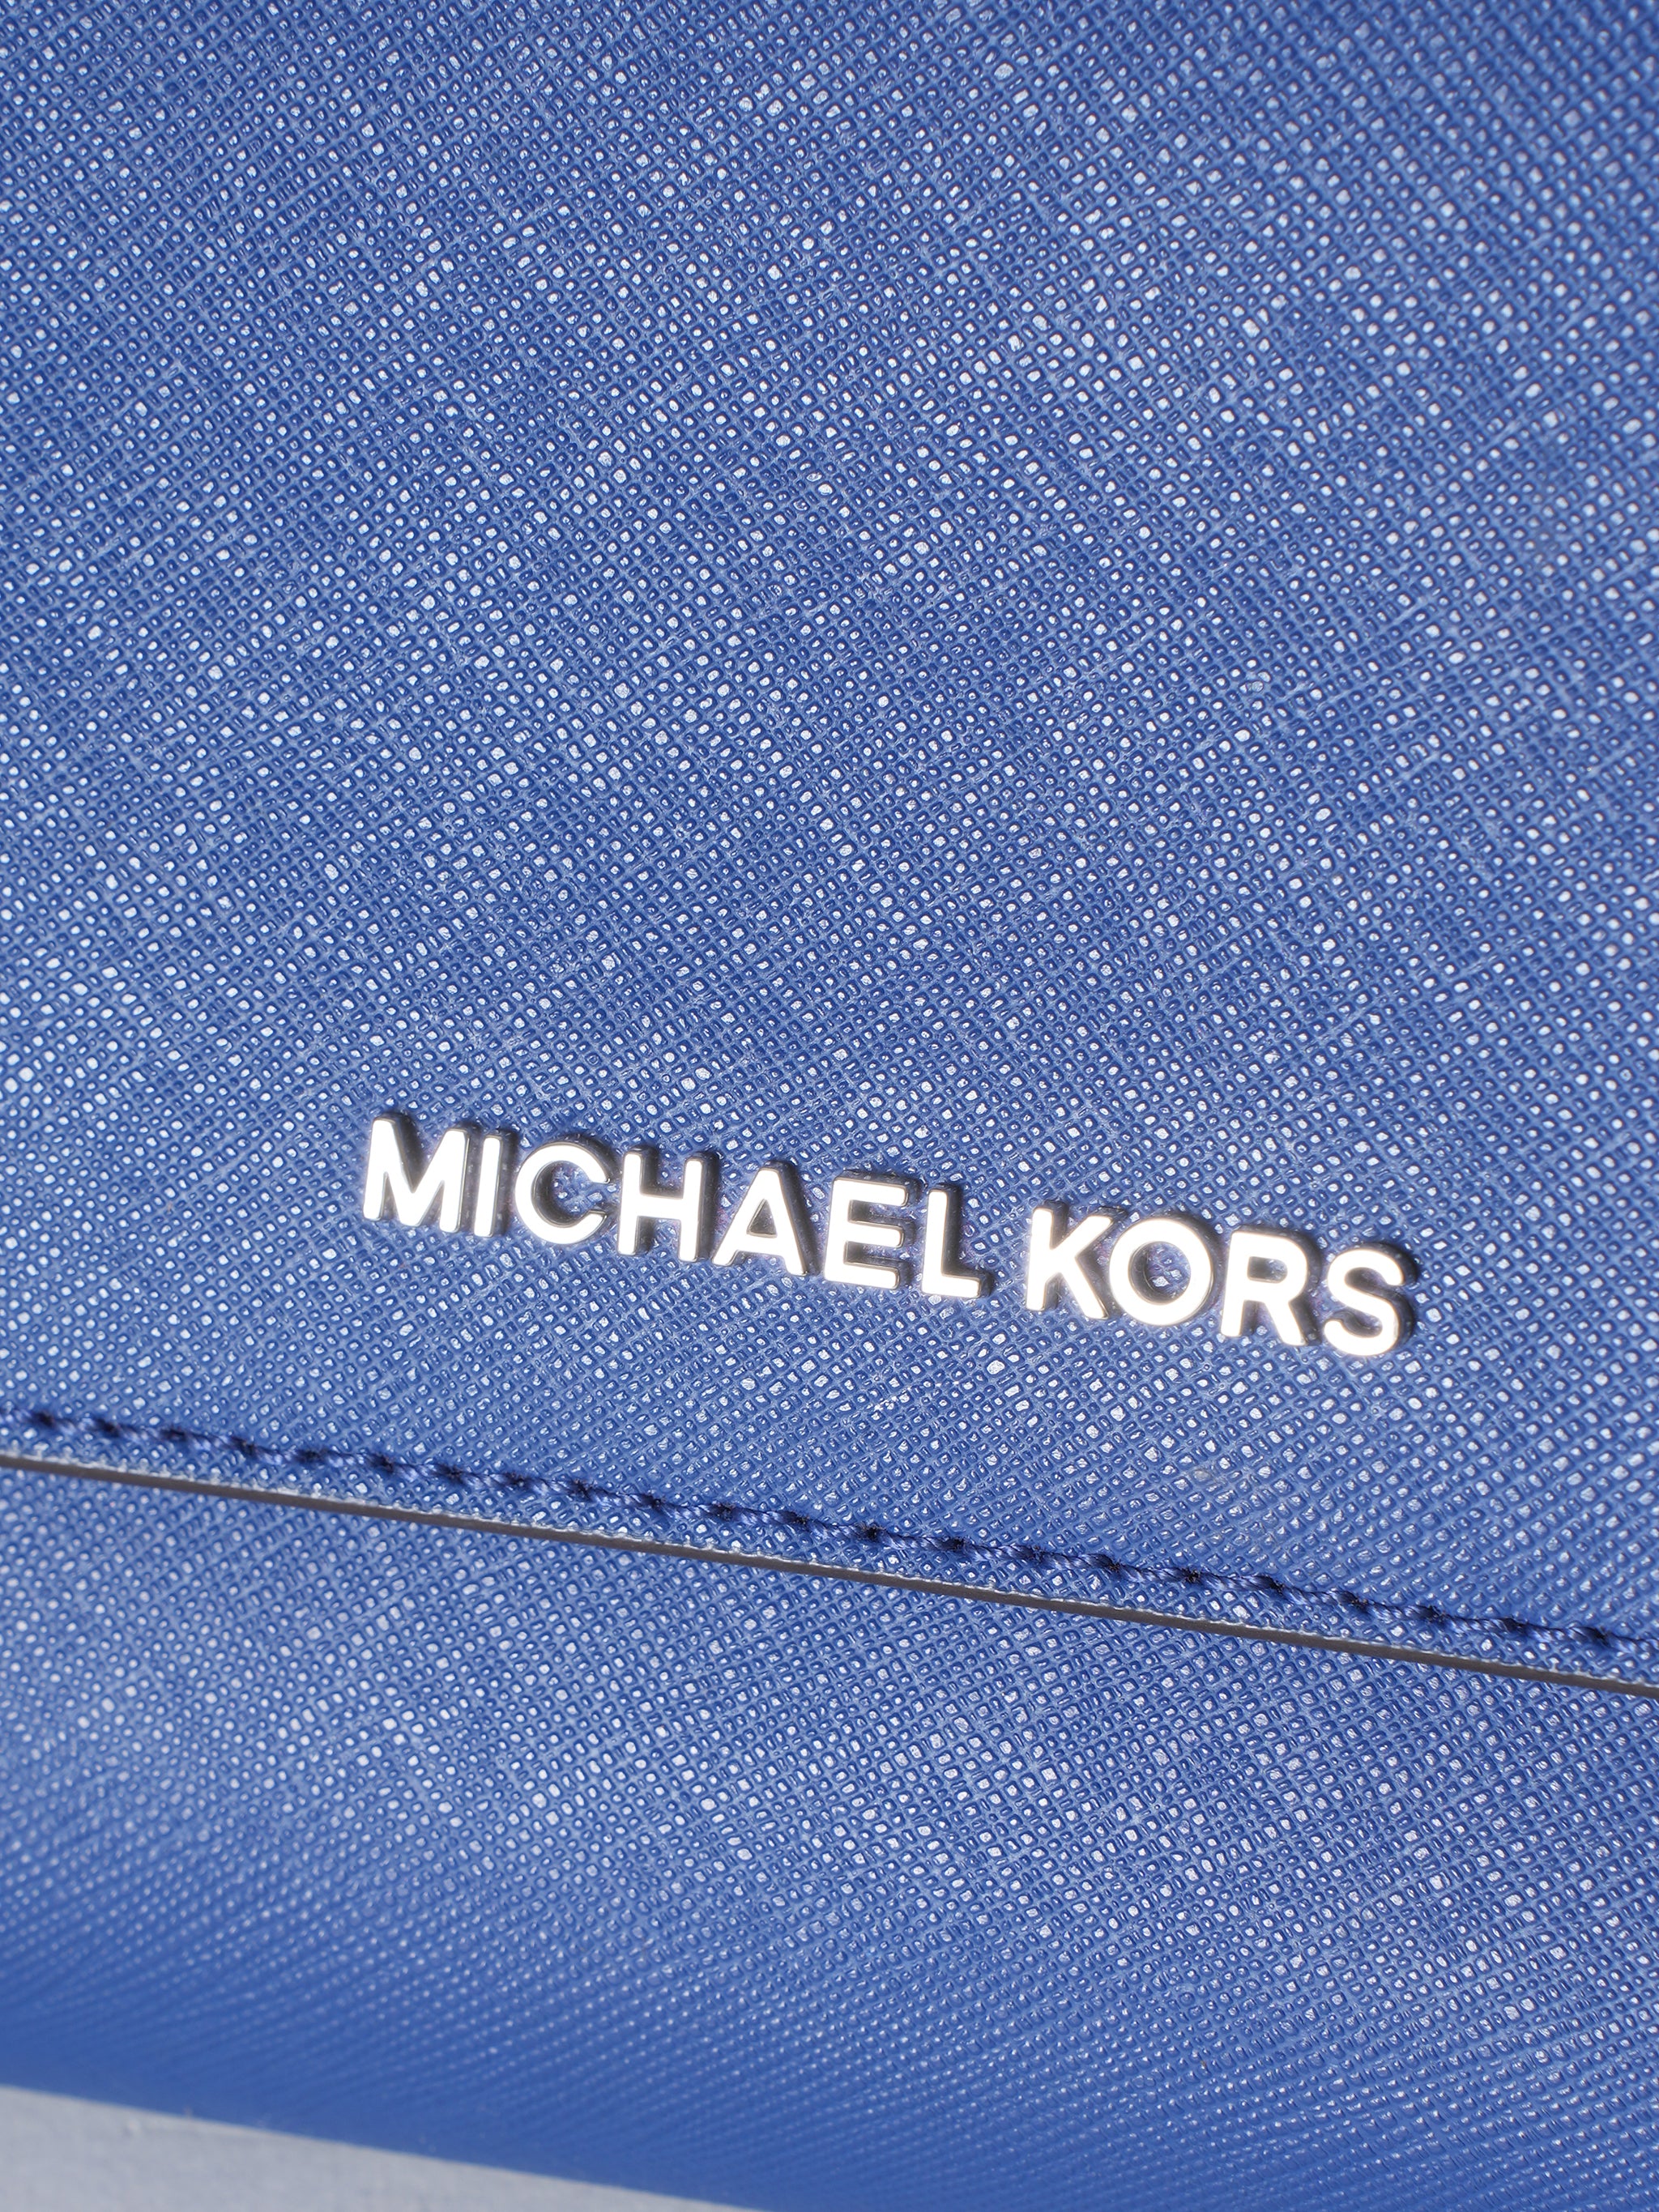 Michael kors Royal Blue Sling Bag With A Card Sling Pouch